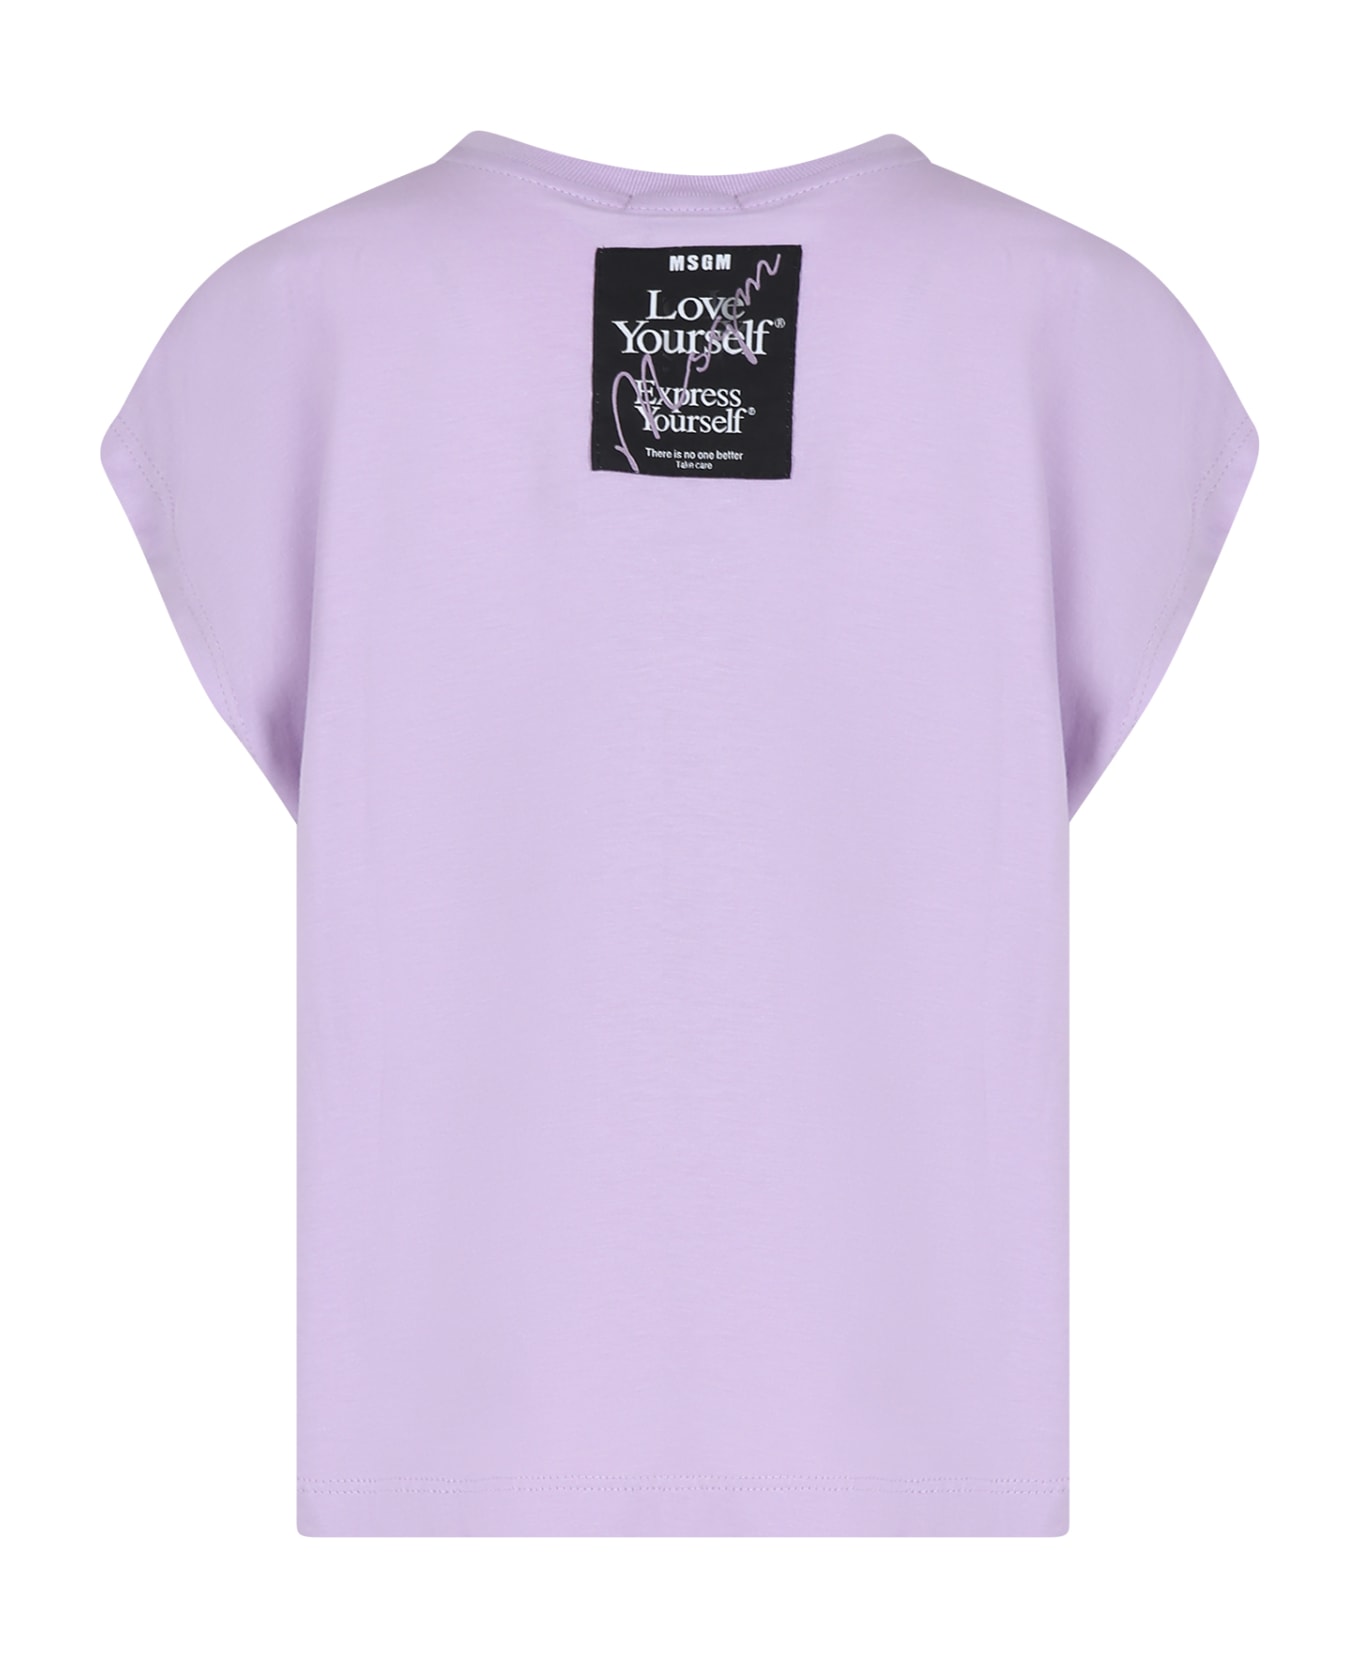 MSGM Lilac T-shirt For Girl With Logo - Lilac